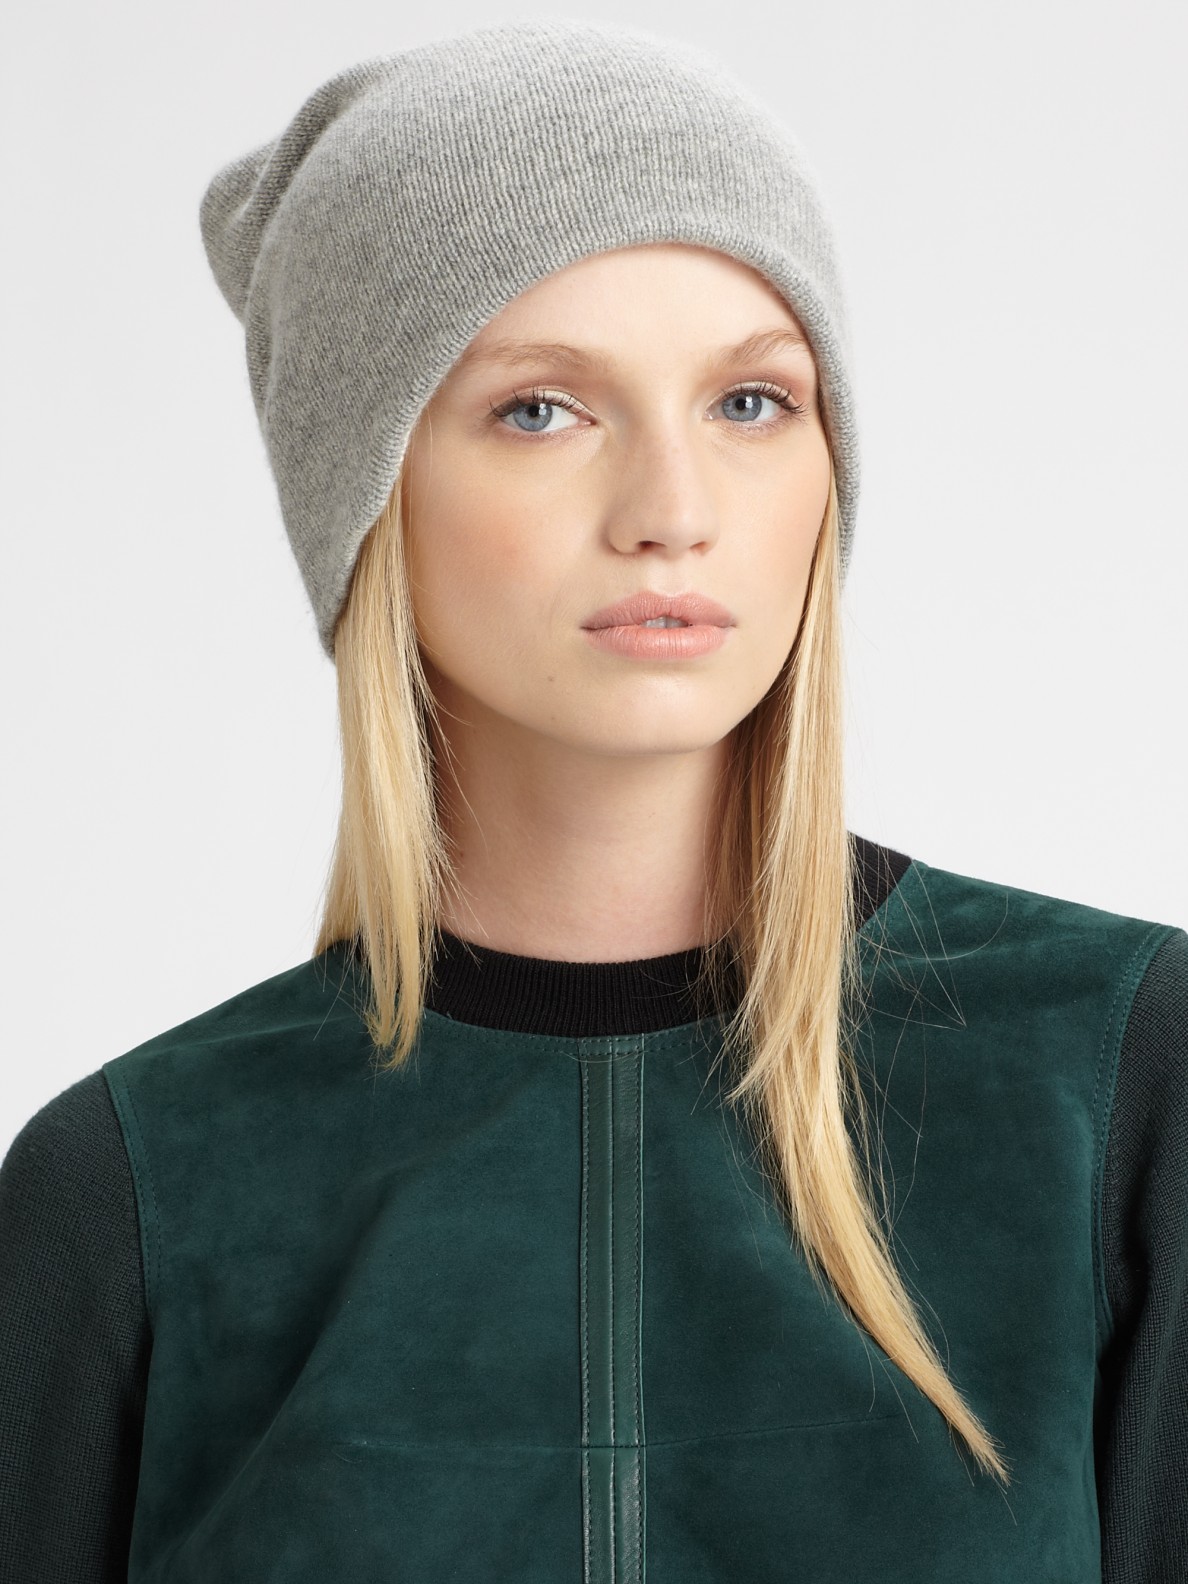 Lyst - Alexander wang Wool Cashmere Beanie in Gray